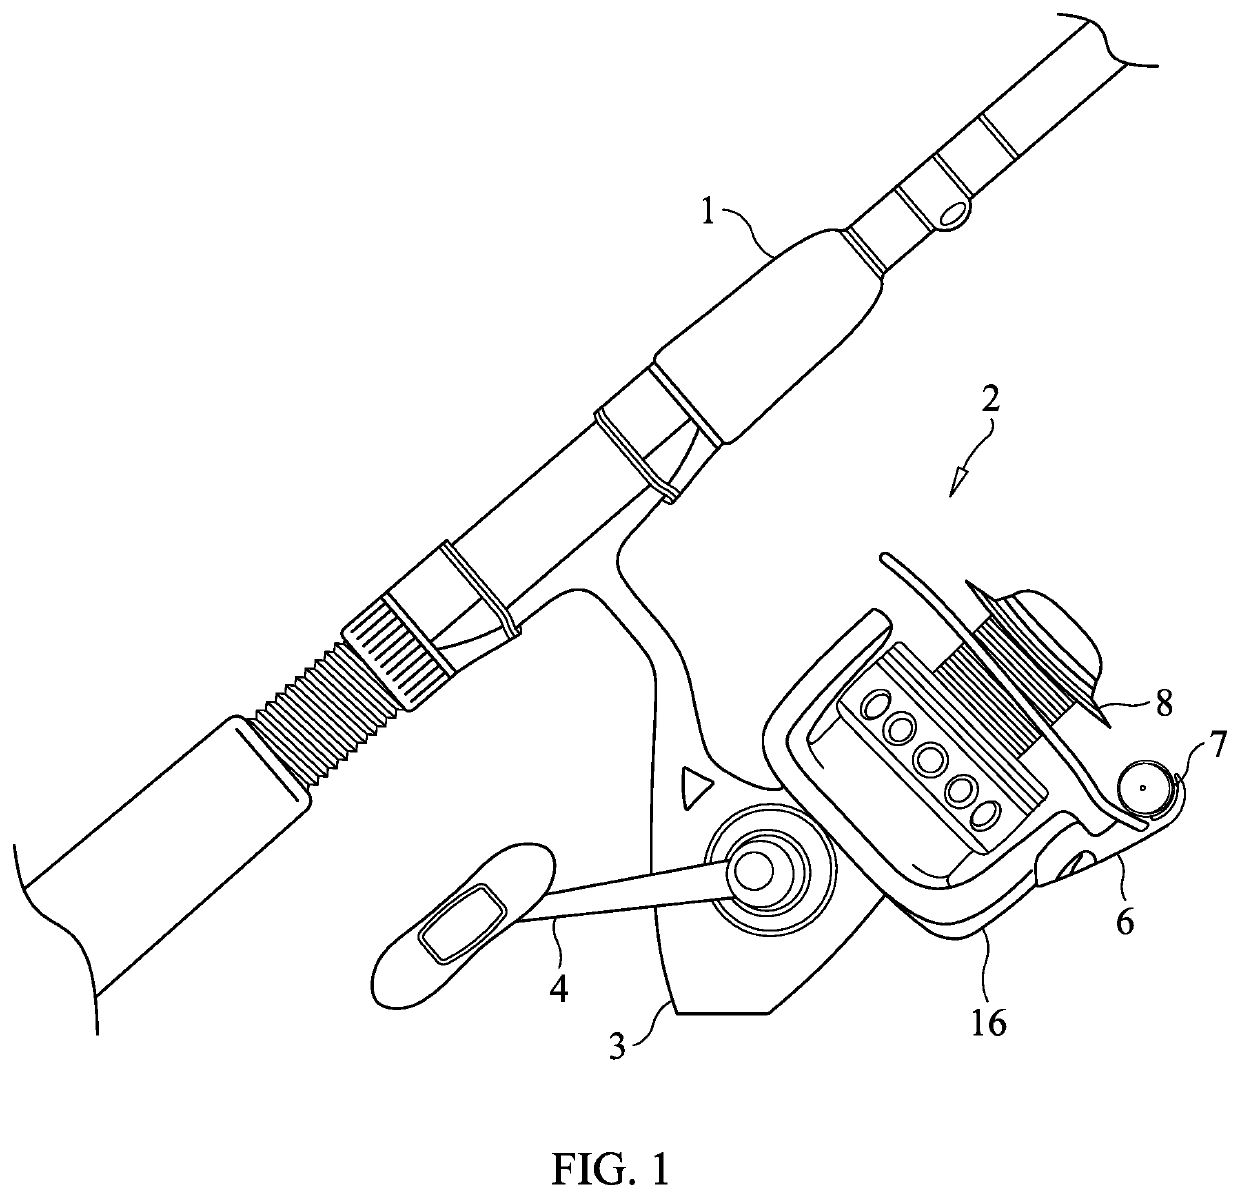 Spinning type fishing reel with bi-directionally rotating rotor with drag control to prevent line twist